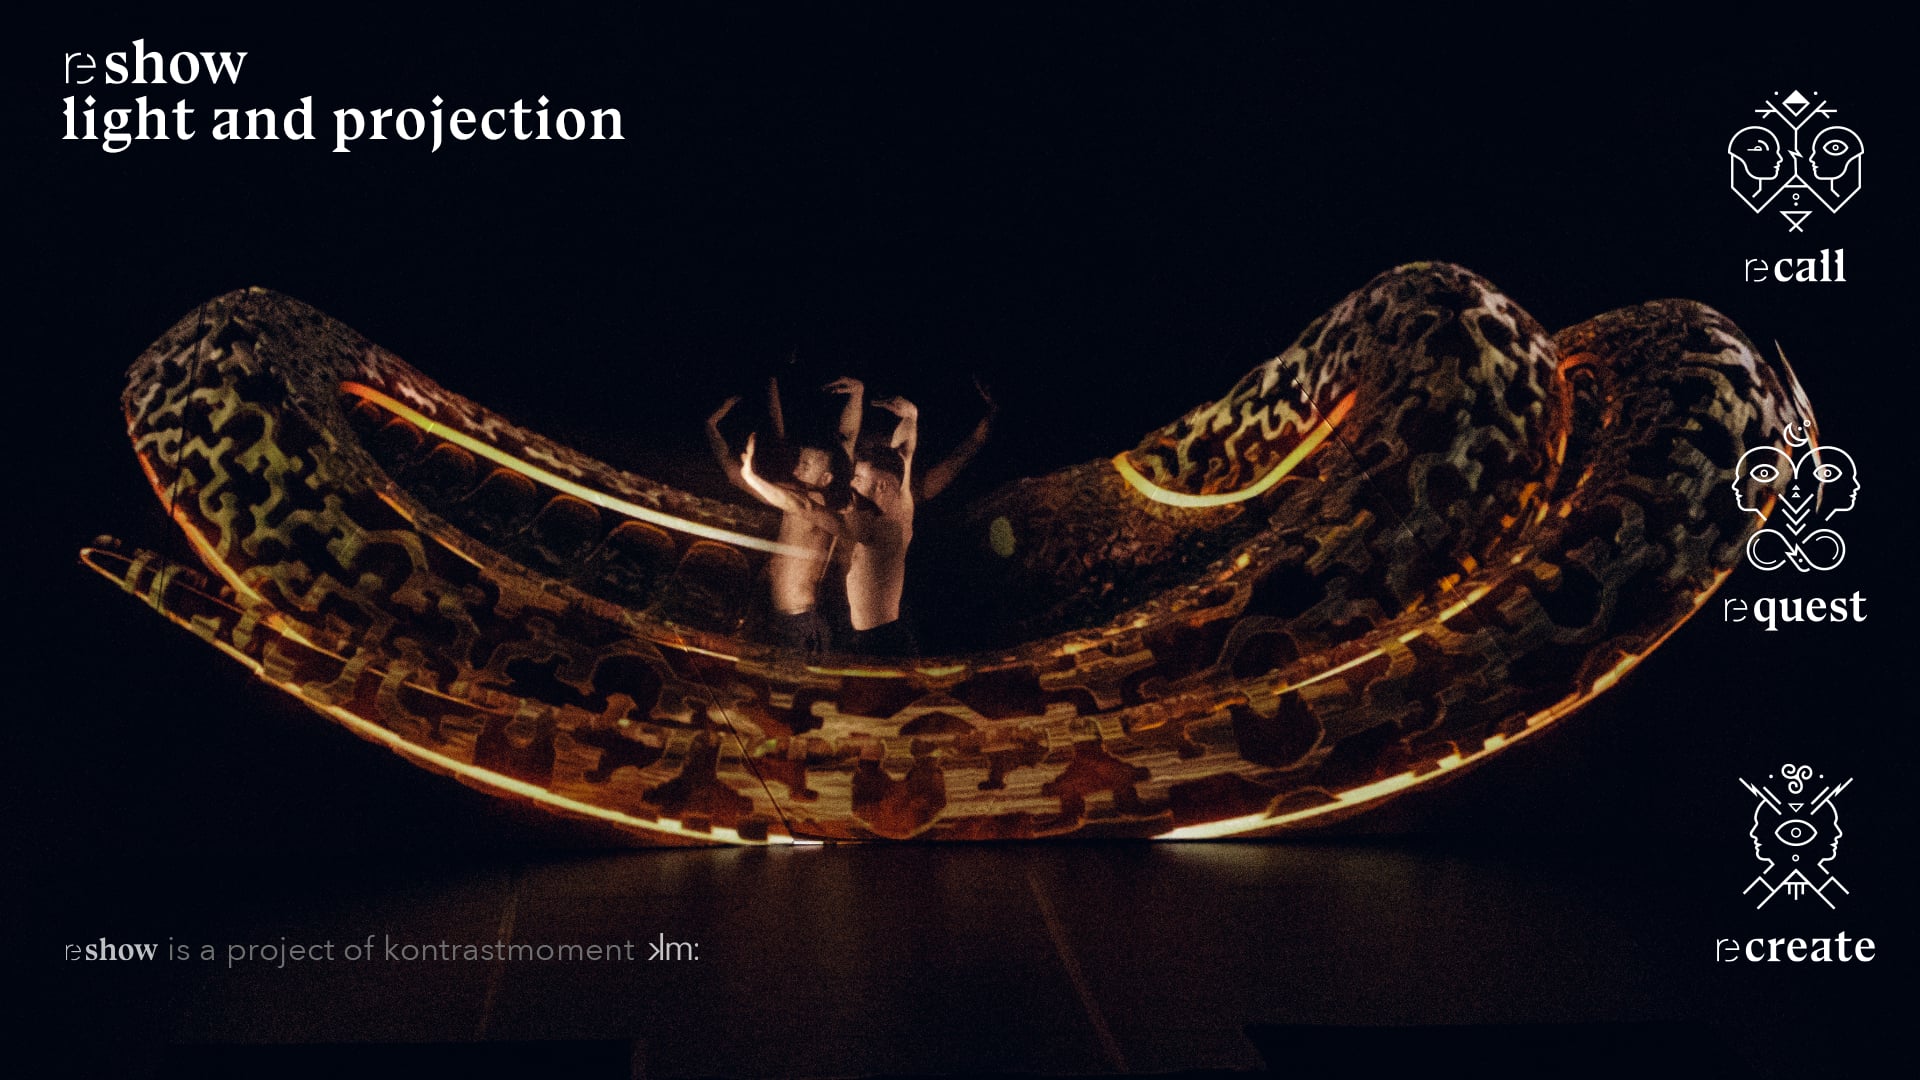 re.show: light and projection